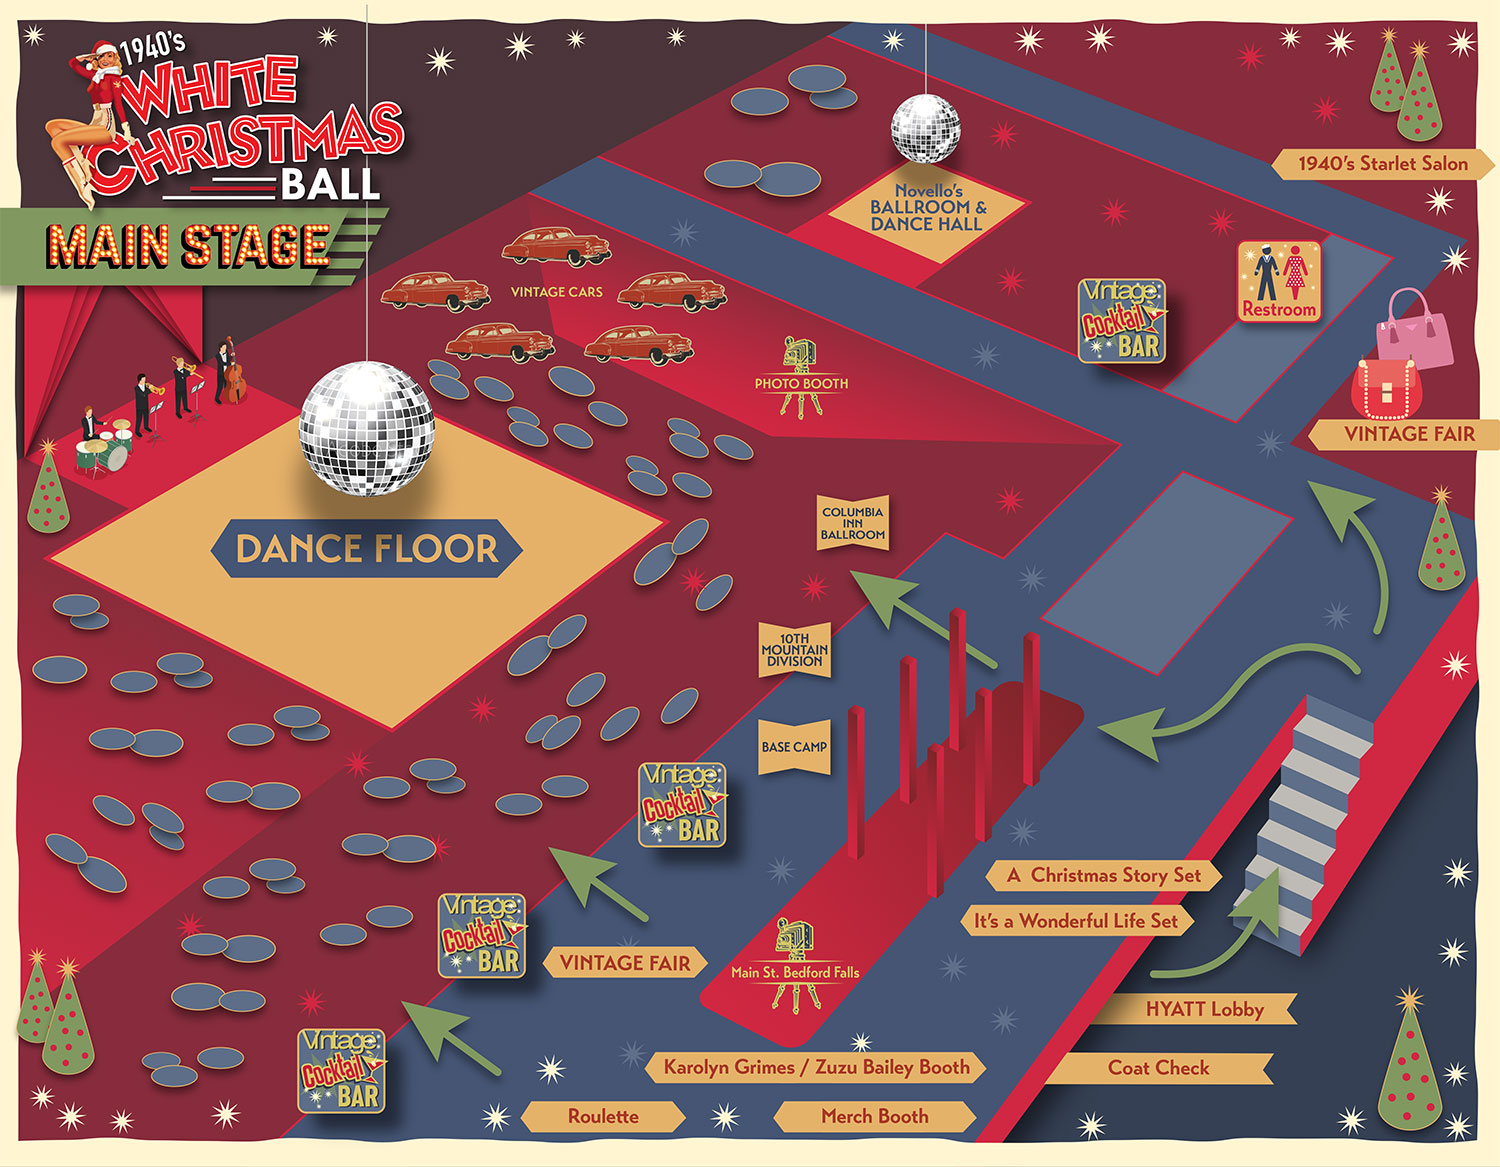 1940s White Christmas Ball Event Map